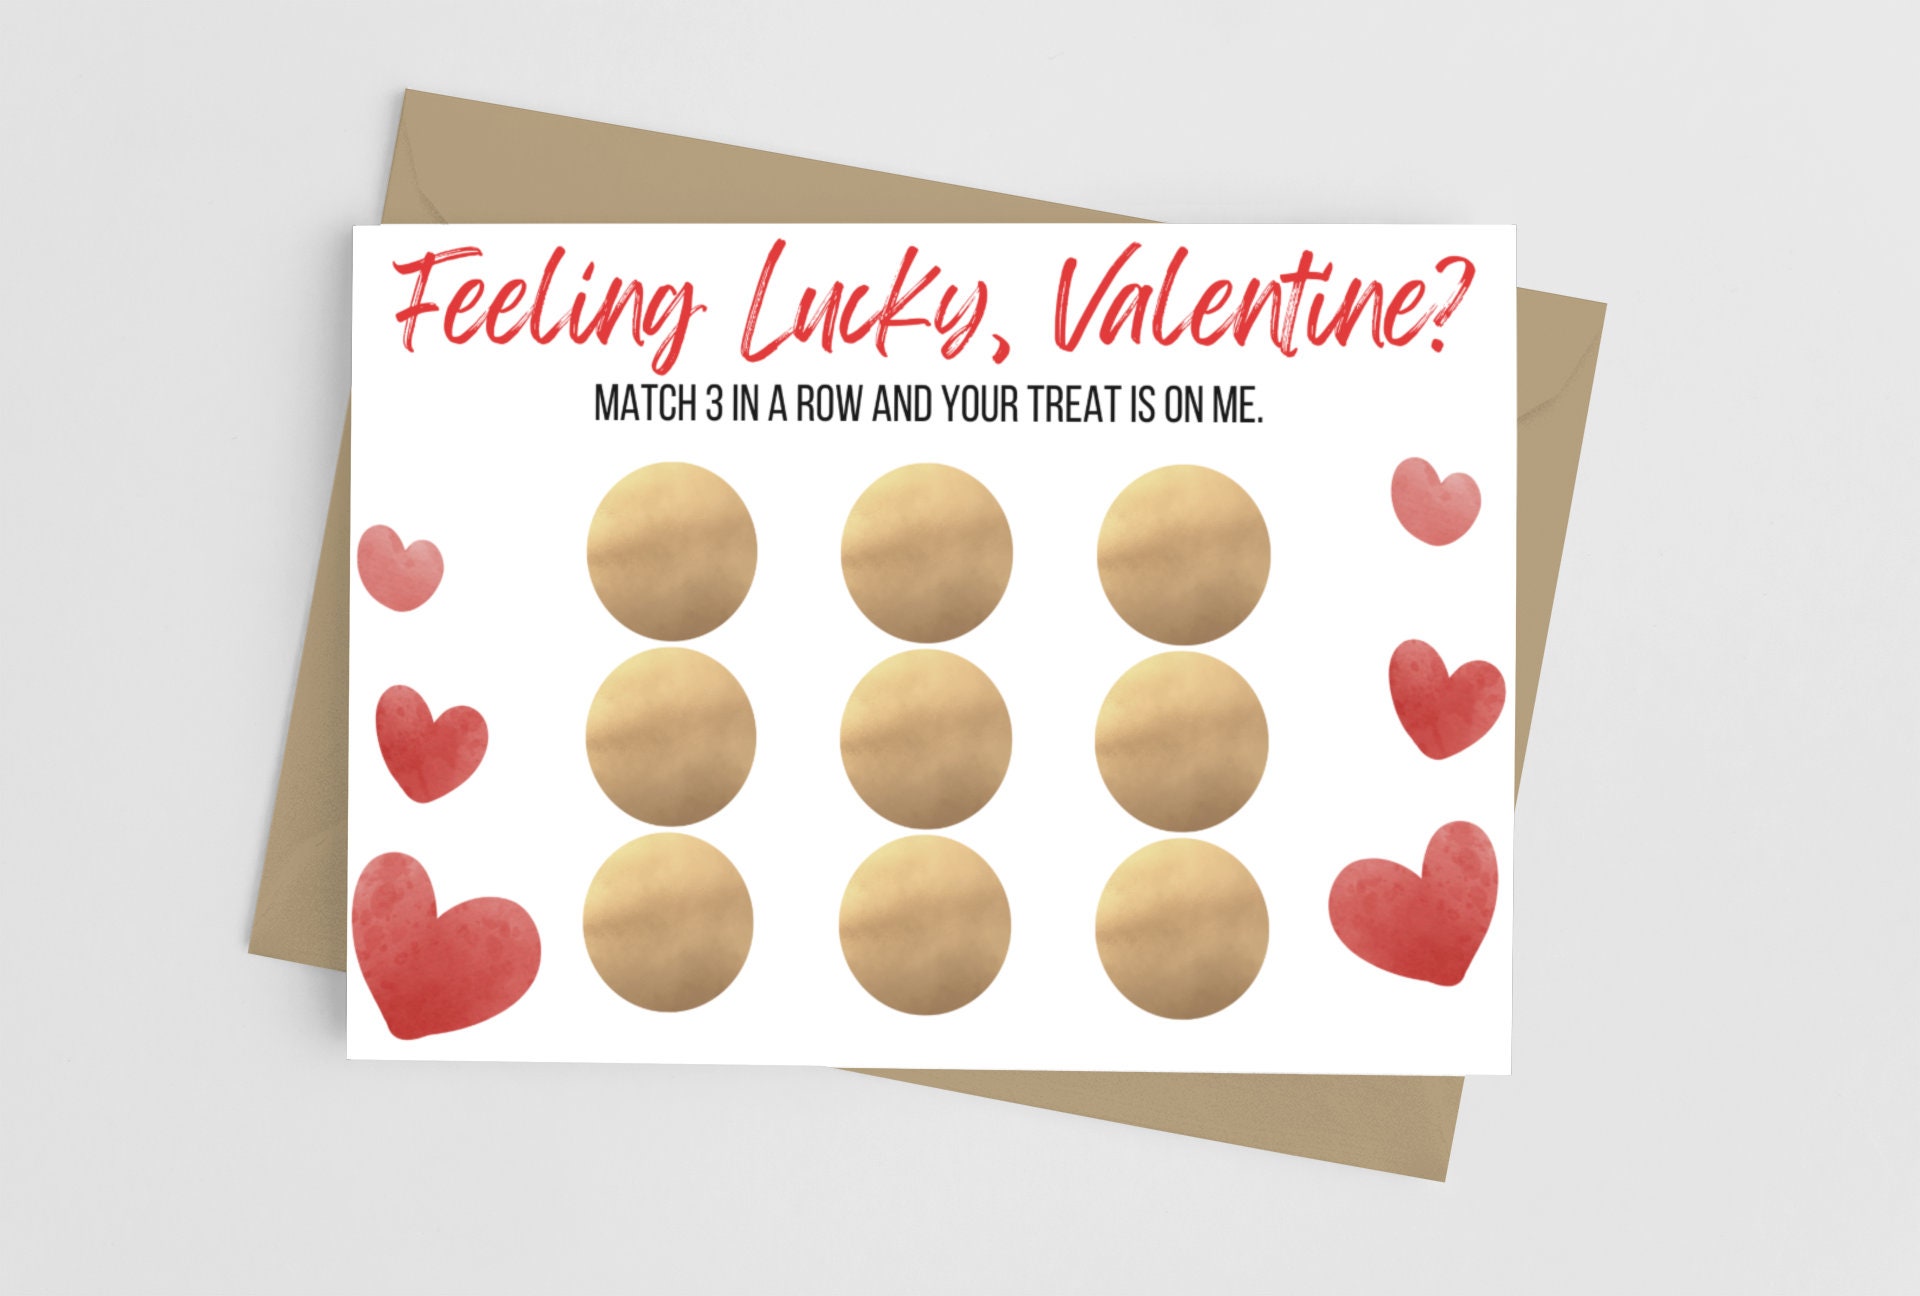 Naughty Valentines Day Cards for Boyfriend, Funny Scratch Off Card